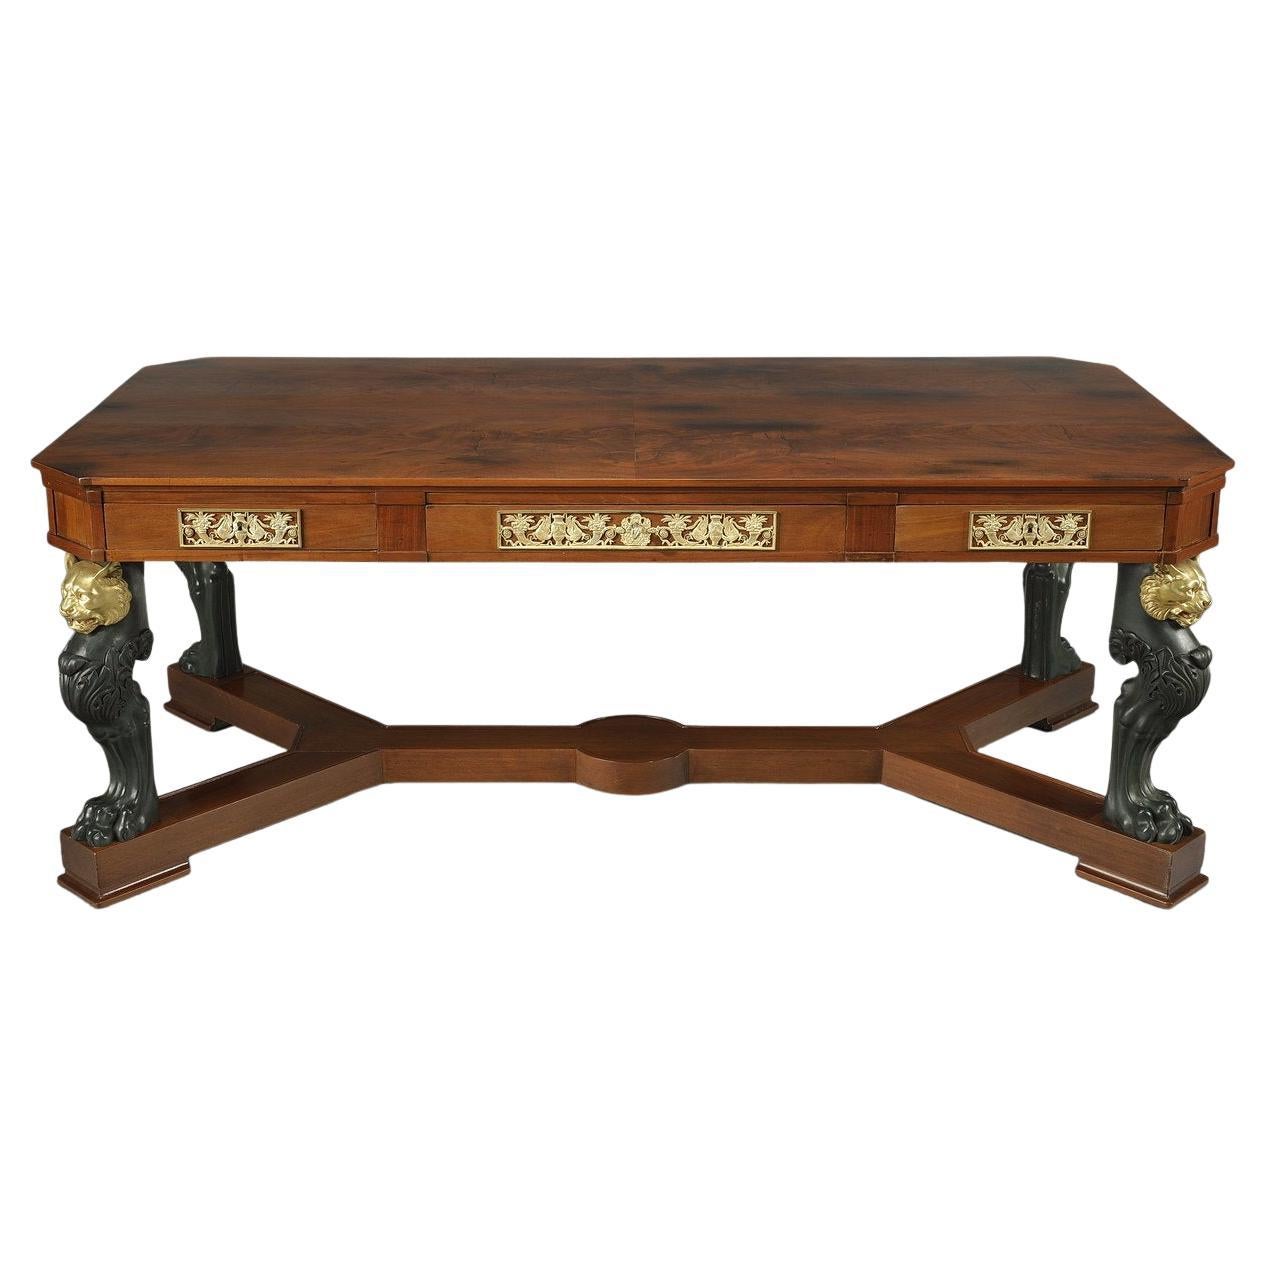 Mahogany and Bronze Veneer Middle Table, "Return from Egypt" Style For Sale